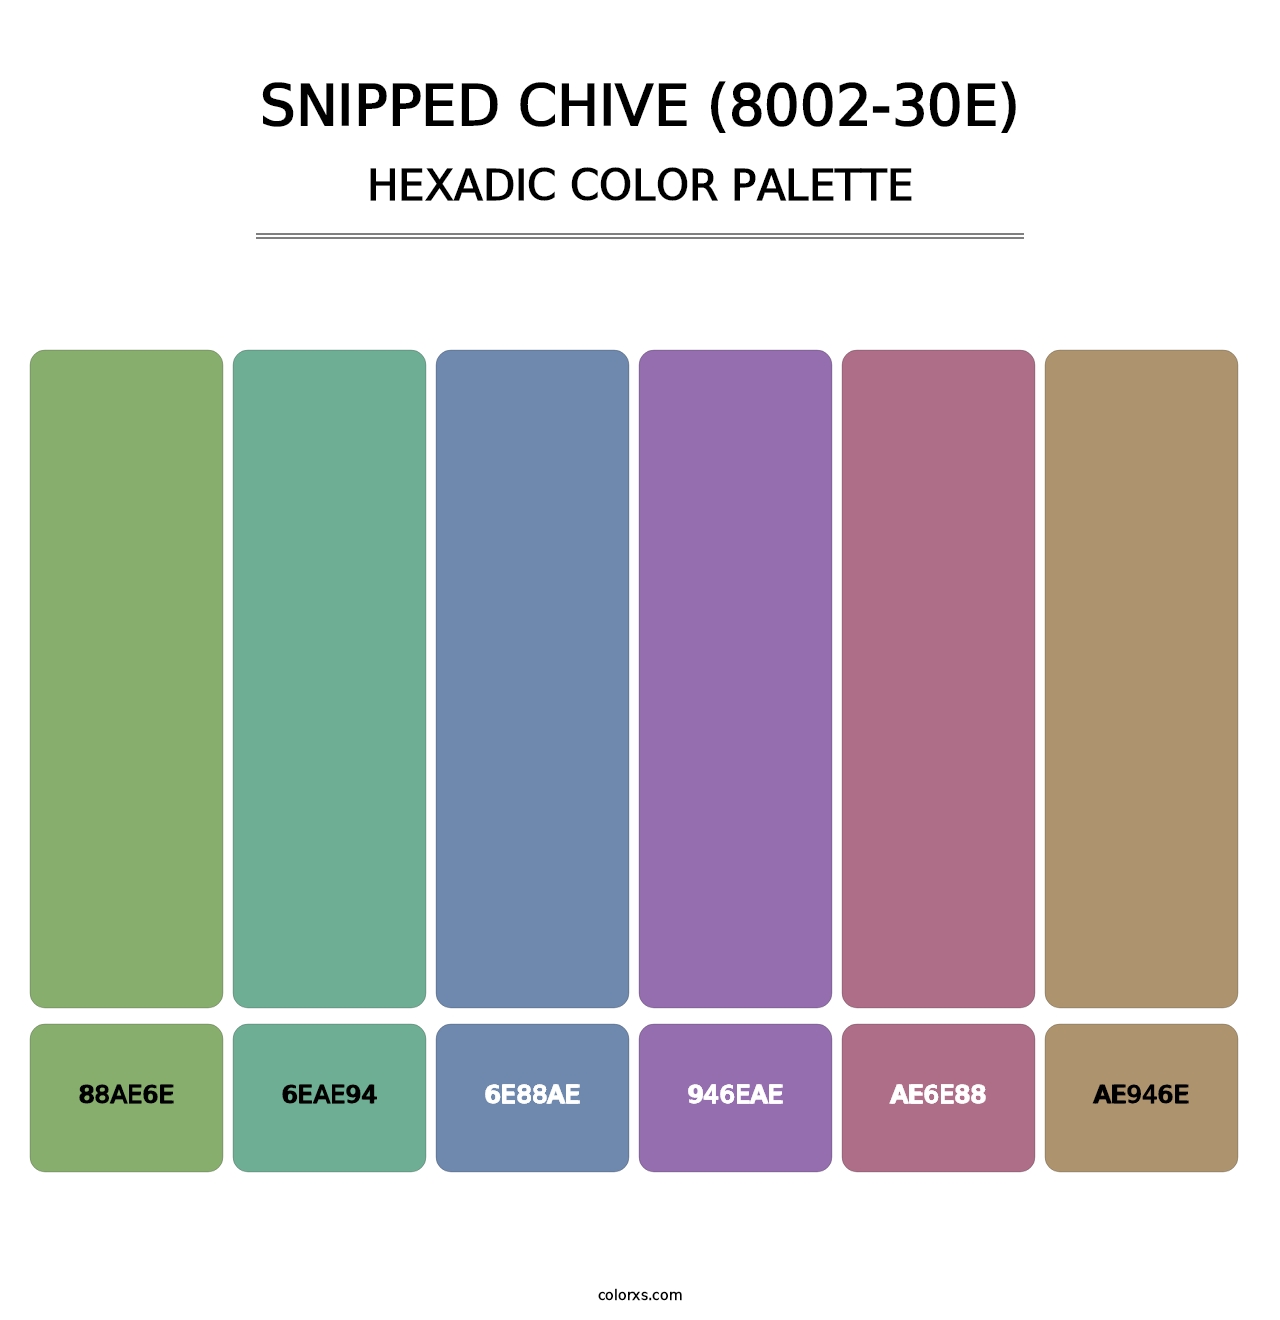 Snipped Chive (8002-30E) - Hexadic Color Palette